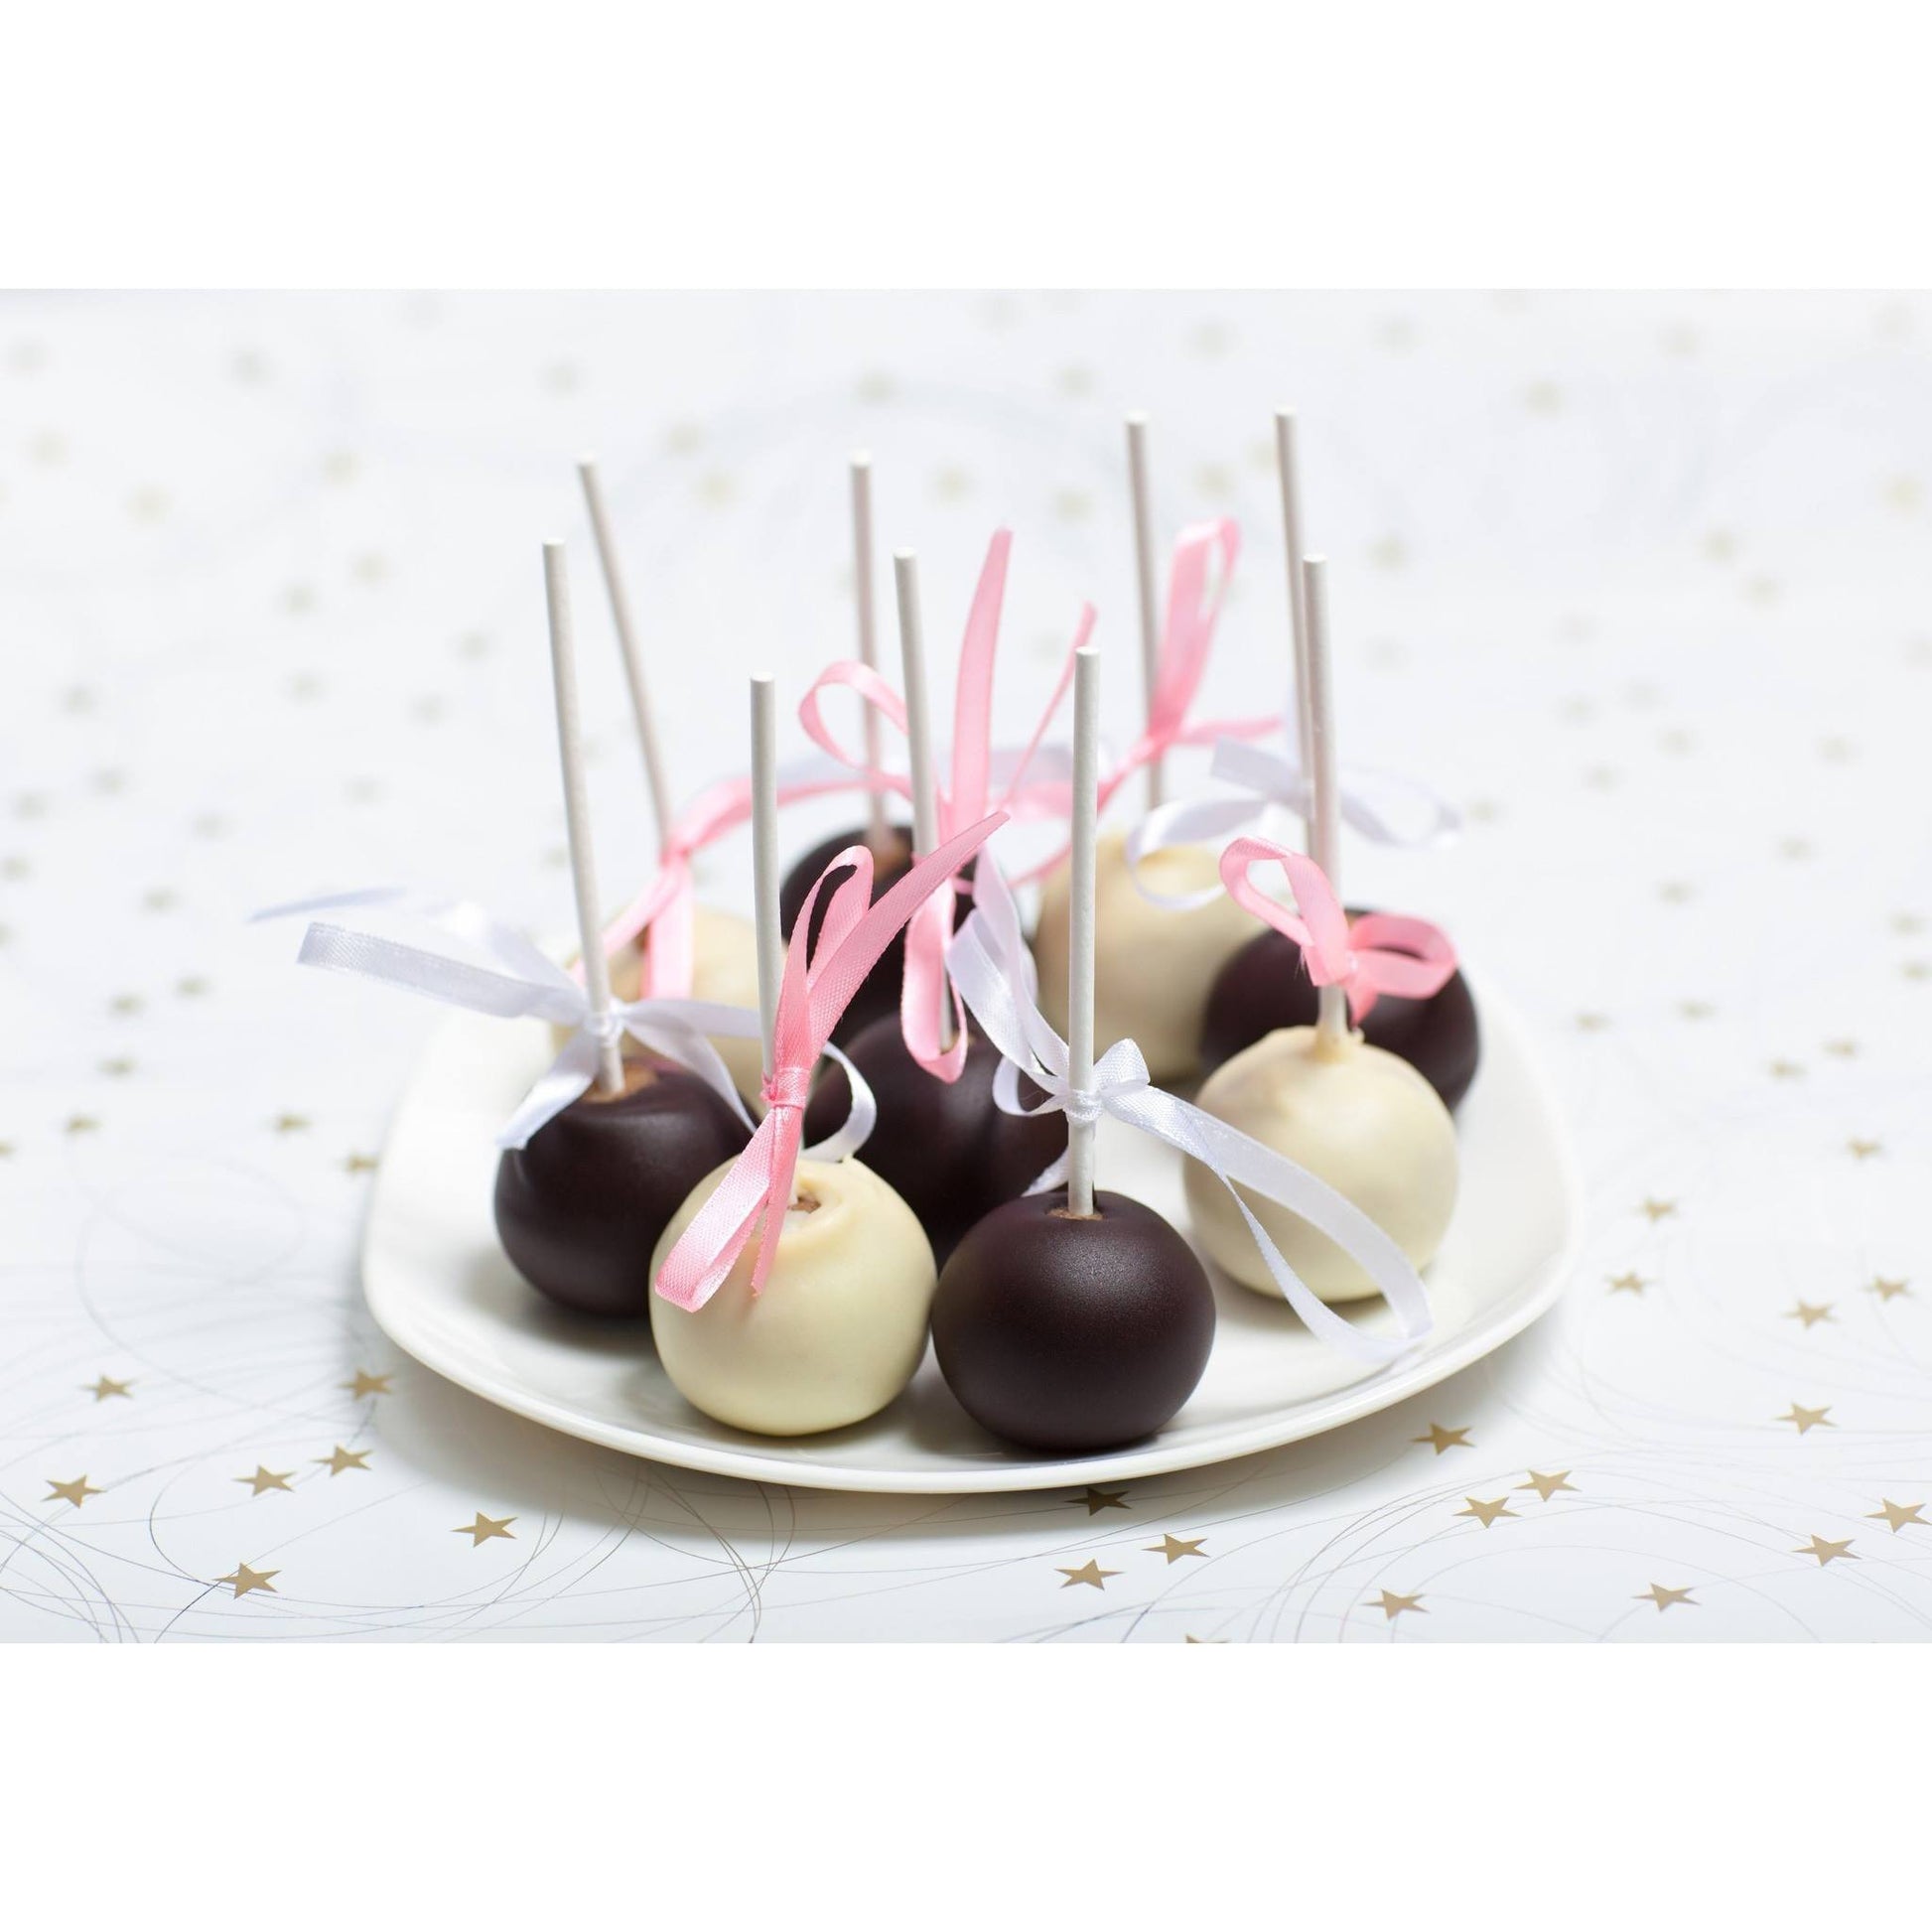 Buy Milk And White Chocolate Cake Pops with Ribbons - Cake Pops Parties